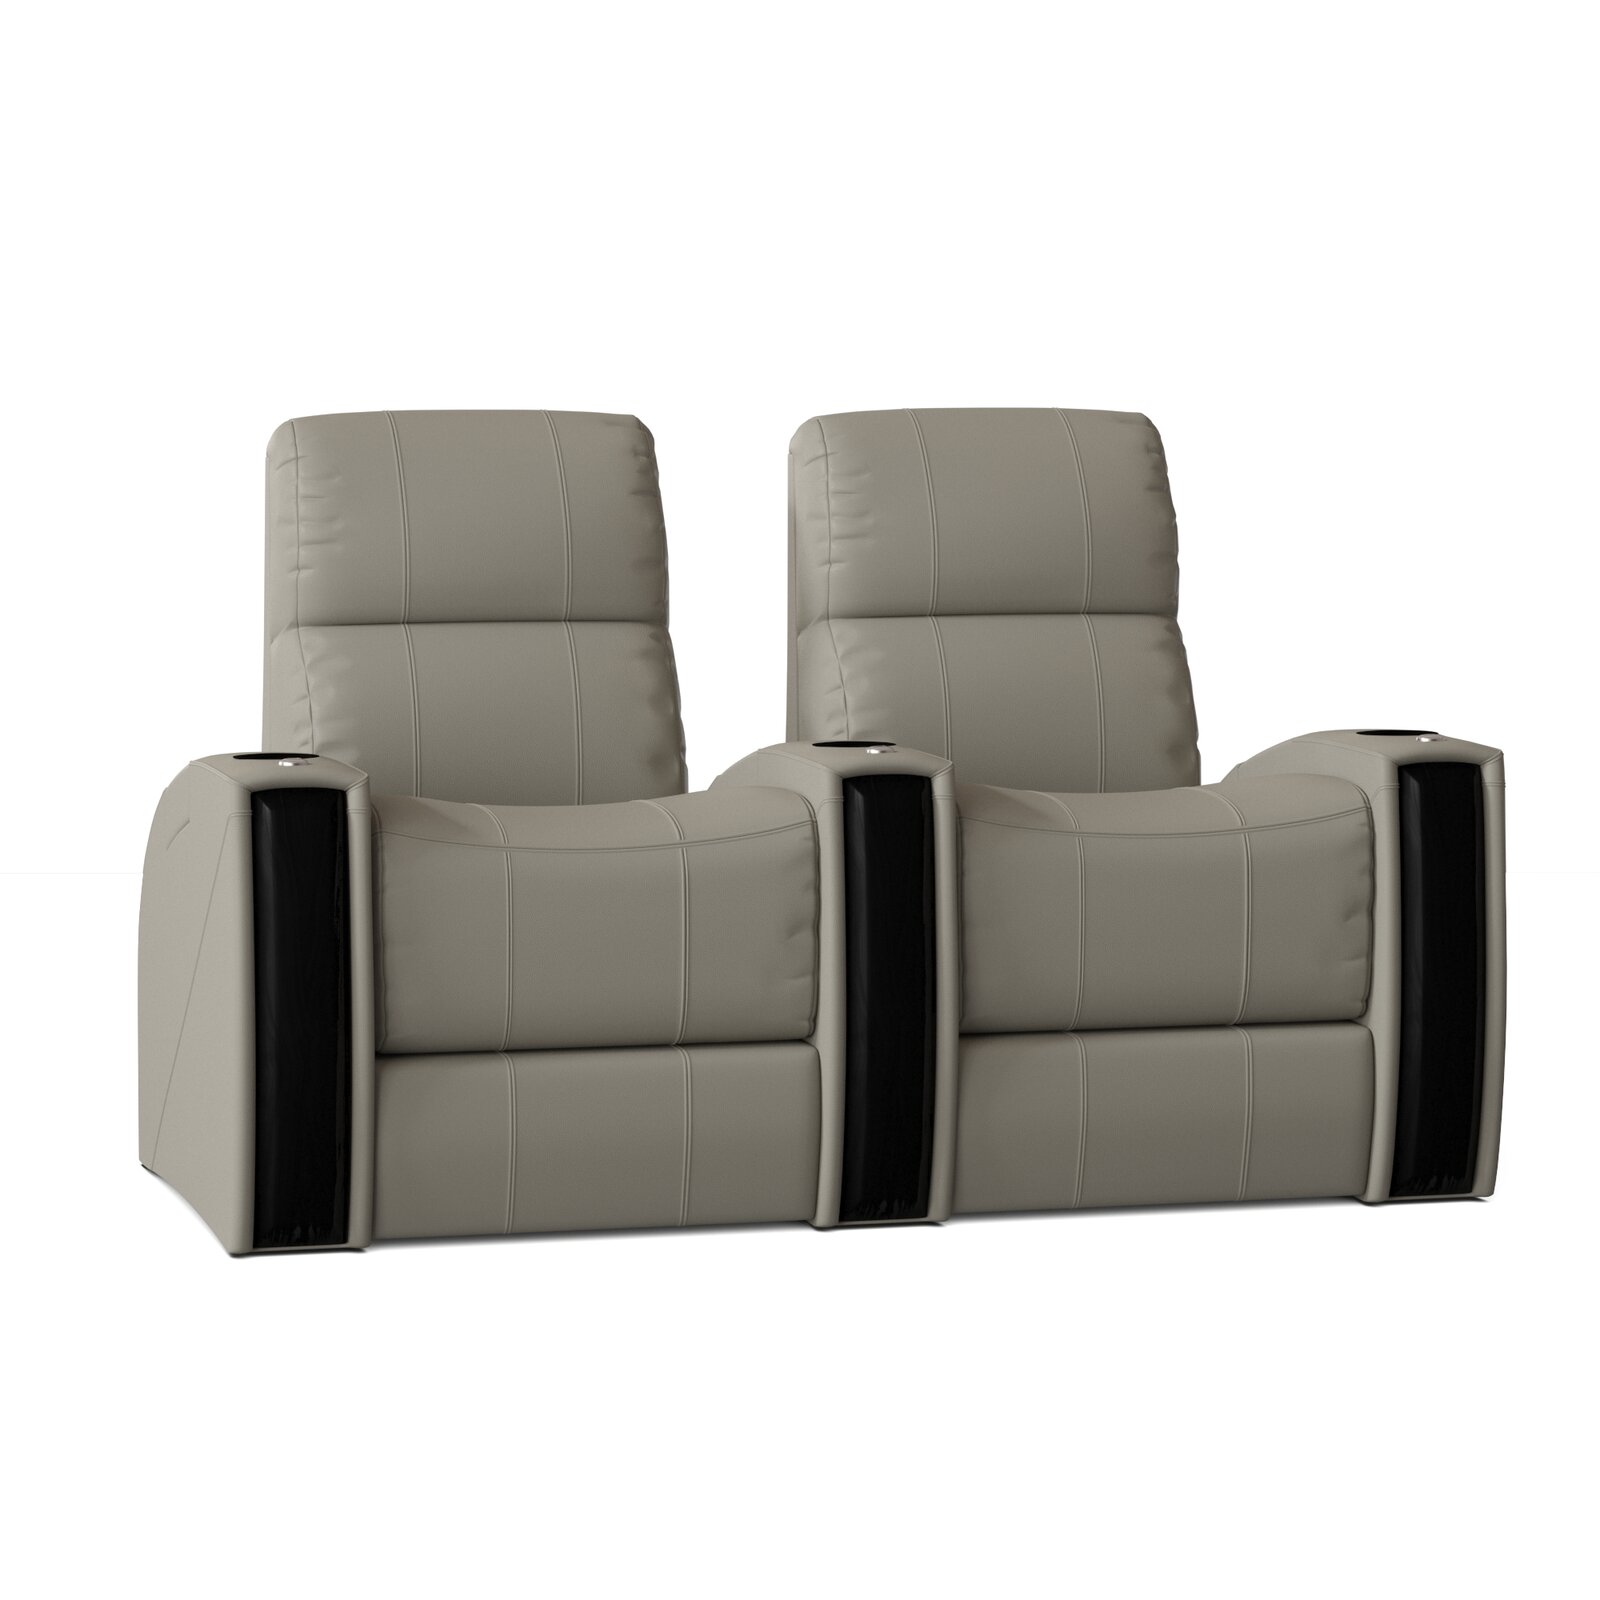 Red Barrel Studio Chrysander 70.5'' Wide Home Theater Seating with Cup Holder & Reviews